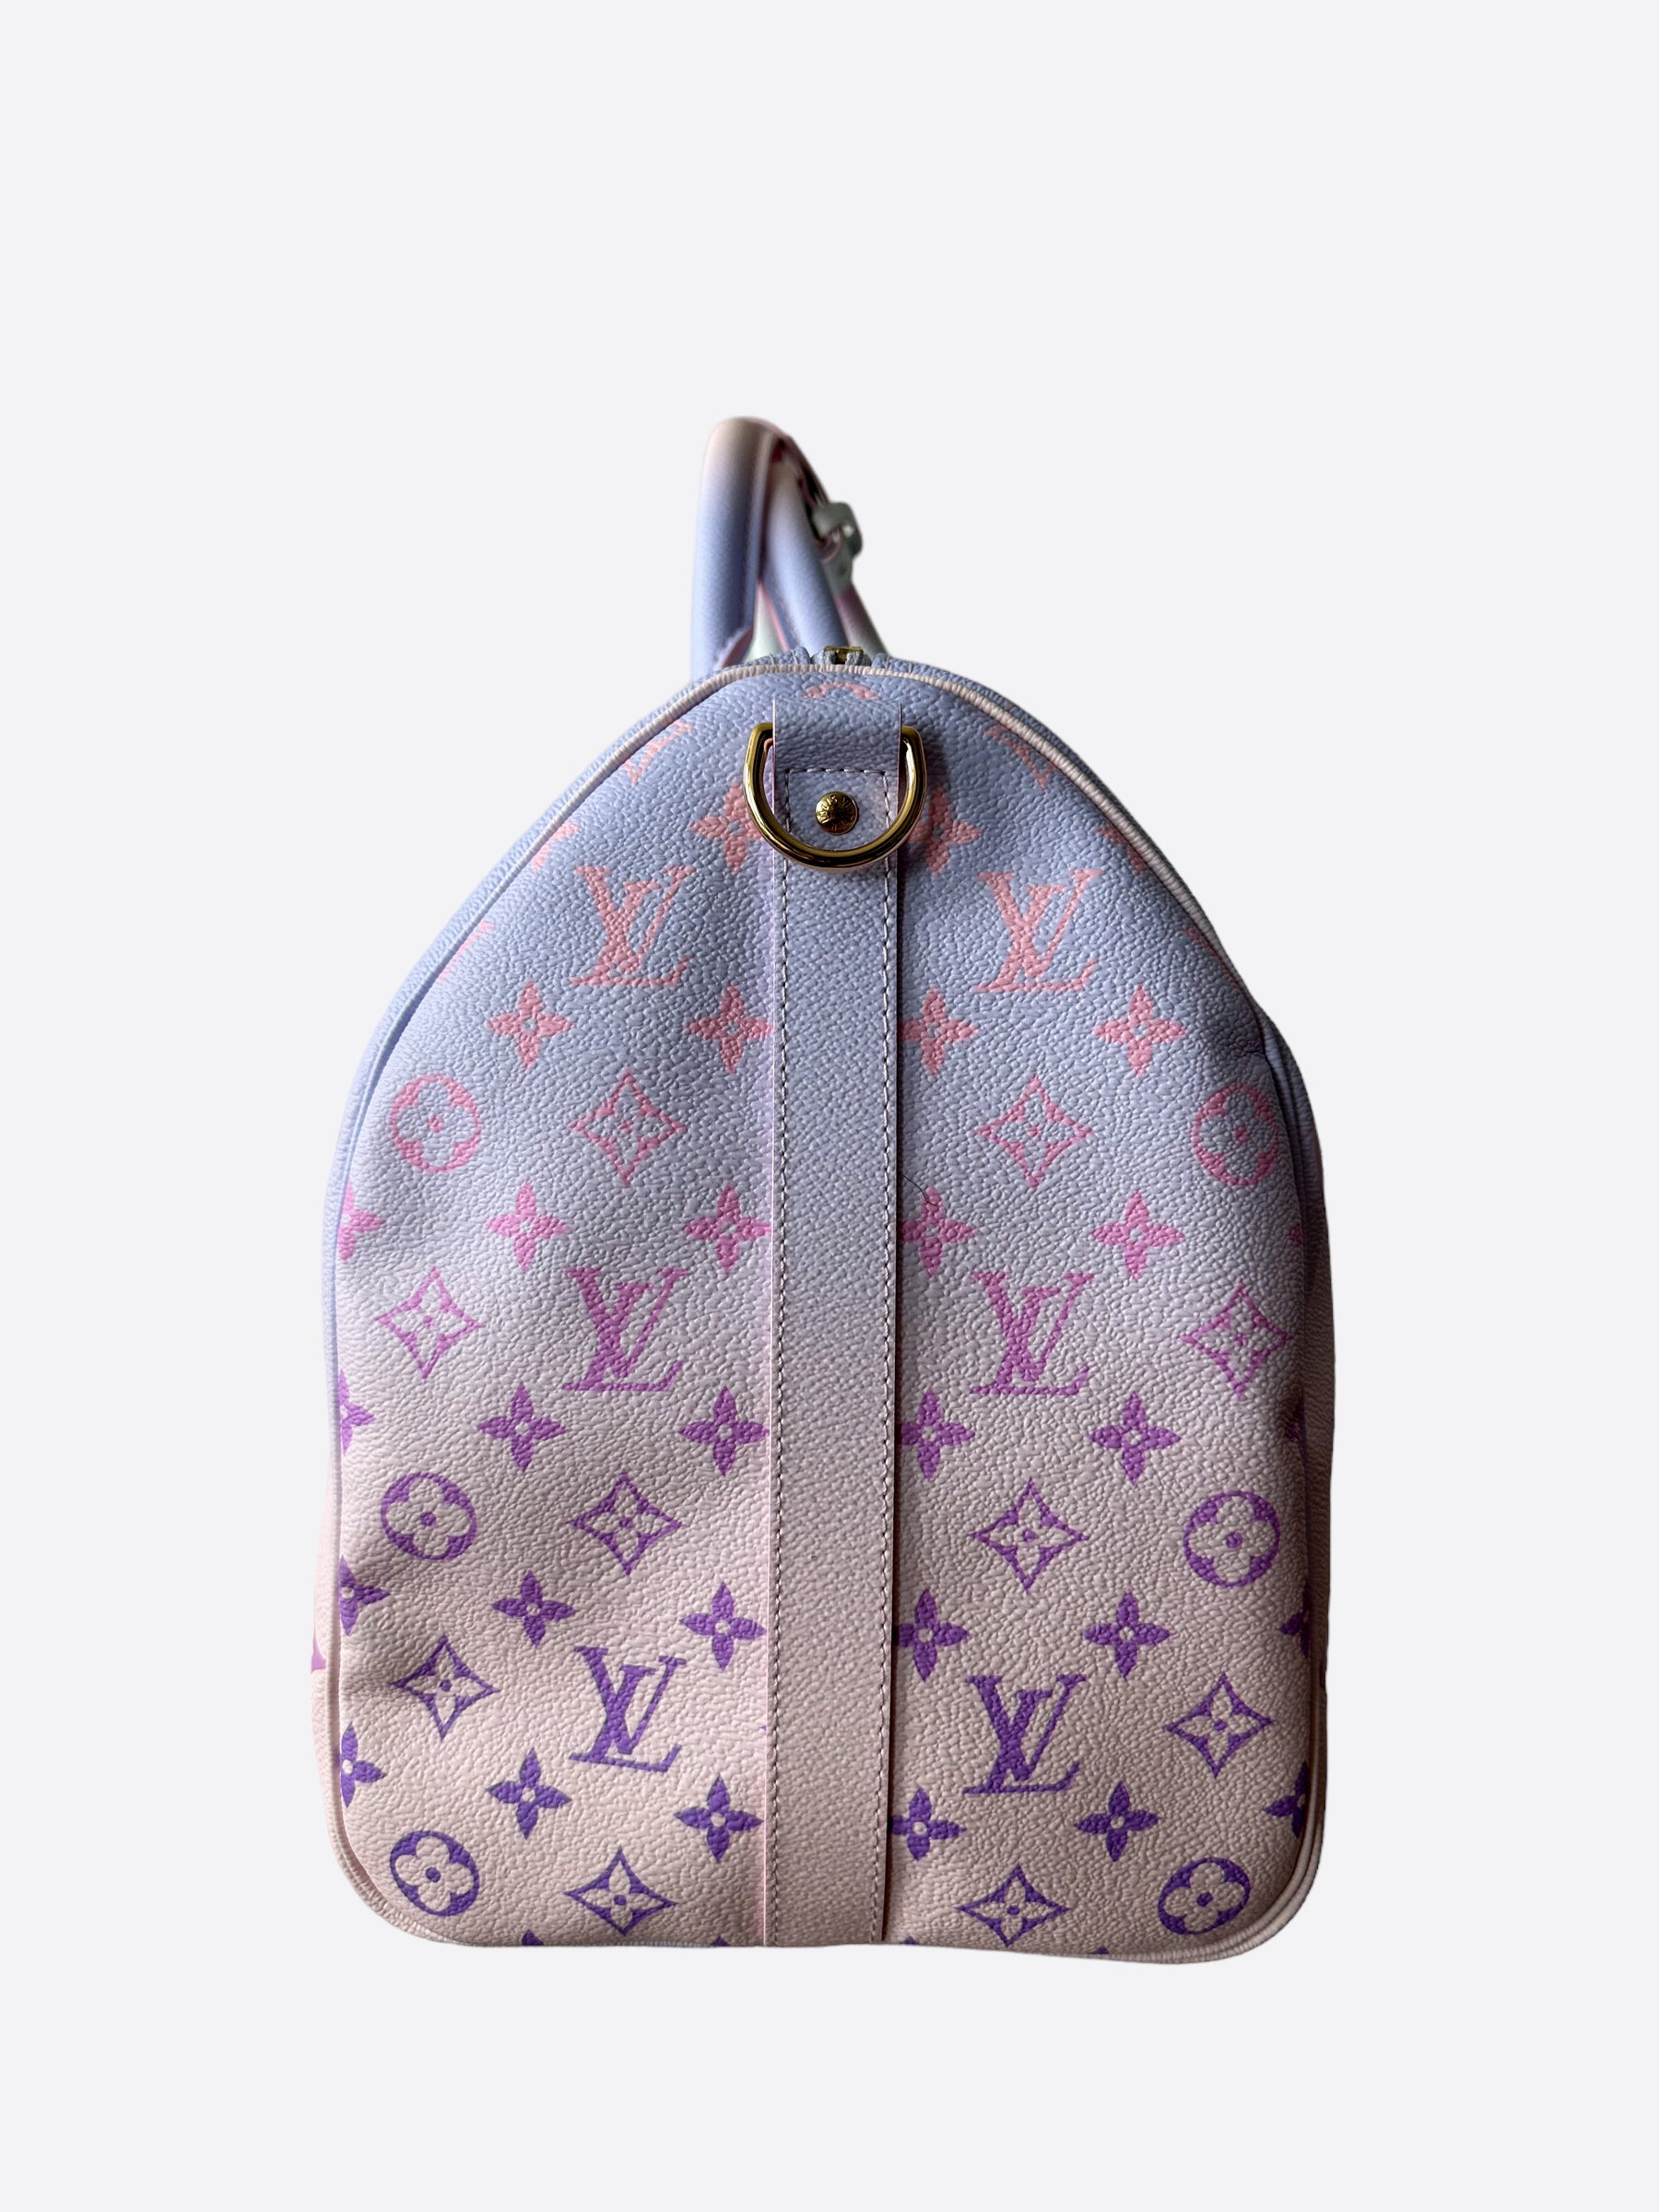 Louis Vuitton Keepall 45, Sunrise Monogram in Pastel Color, New in